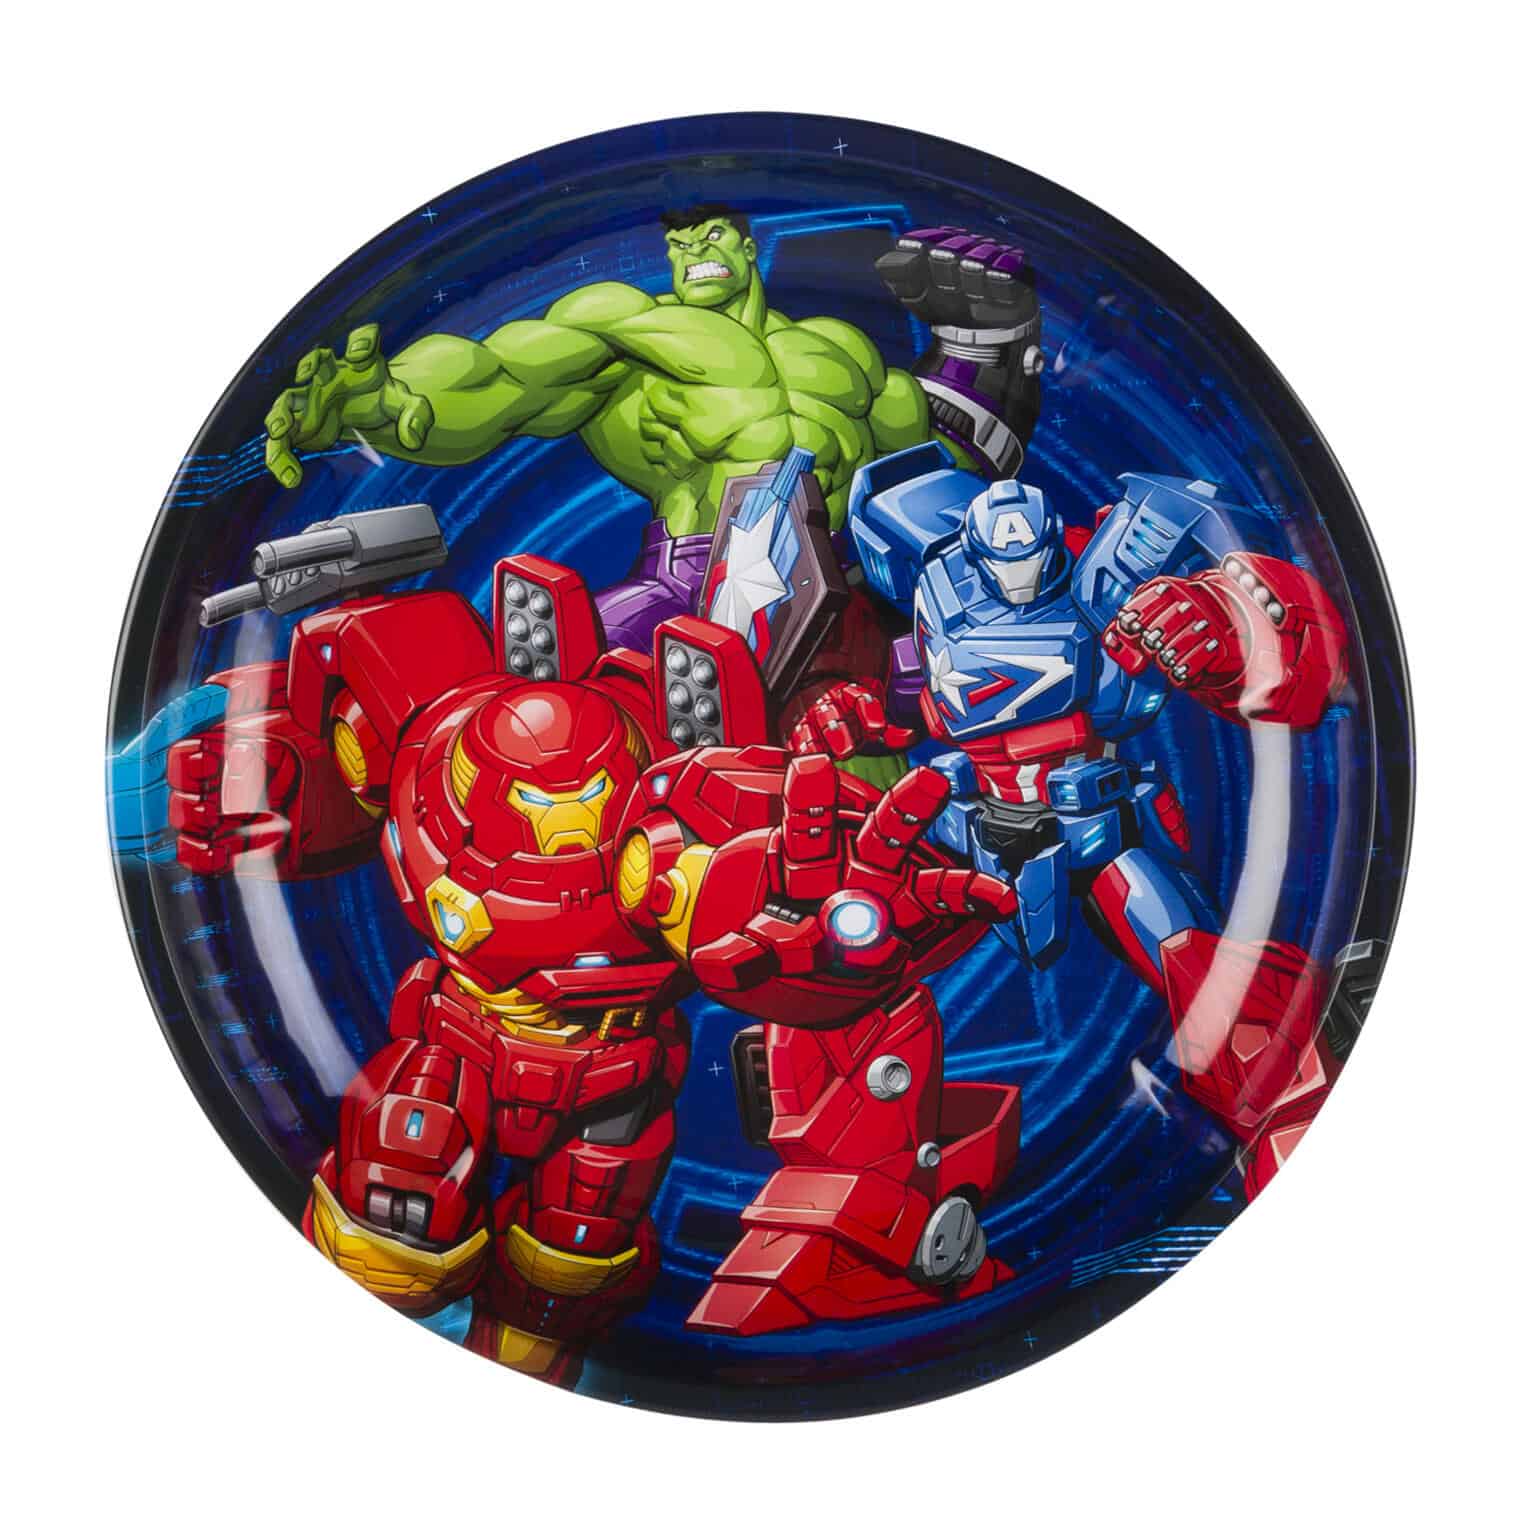 This Avengers Serving Tin Bowl By The Tin Box Company 10.25" Plate (27cm) is made with love by Premier Homegoods! Shop more unique gift ideas today with Spots Initiatives, the best way to support creators.